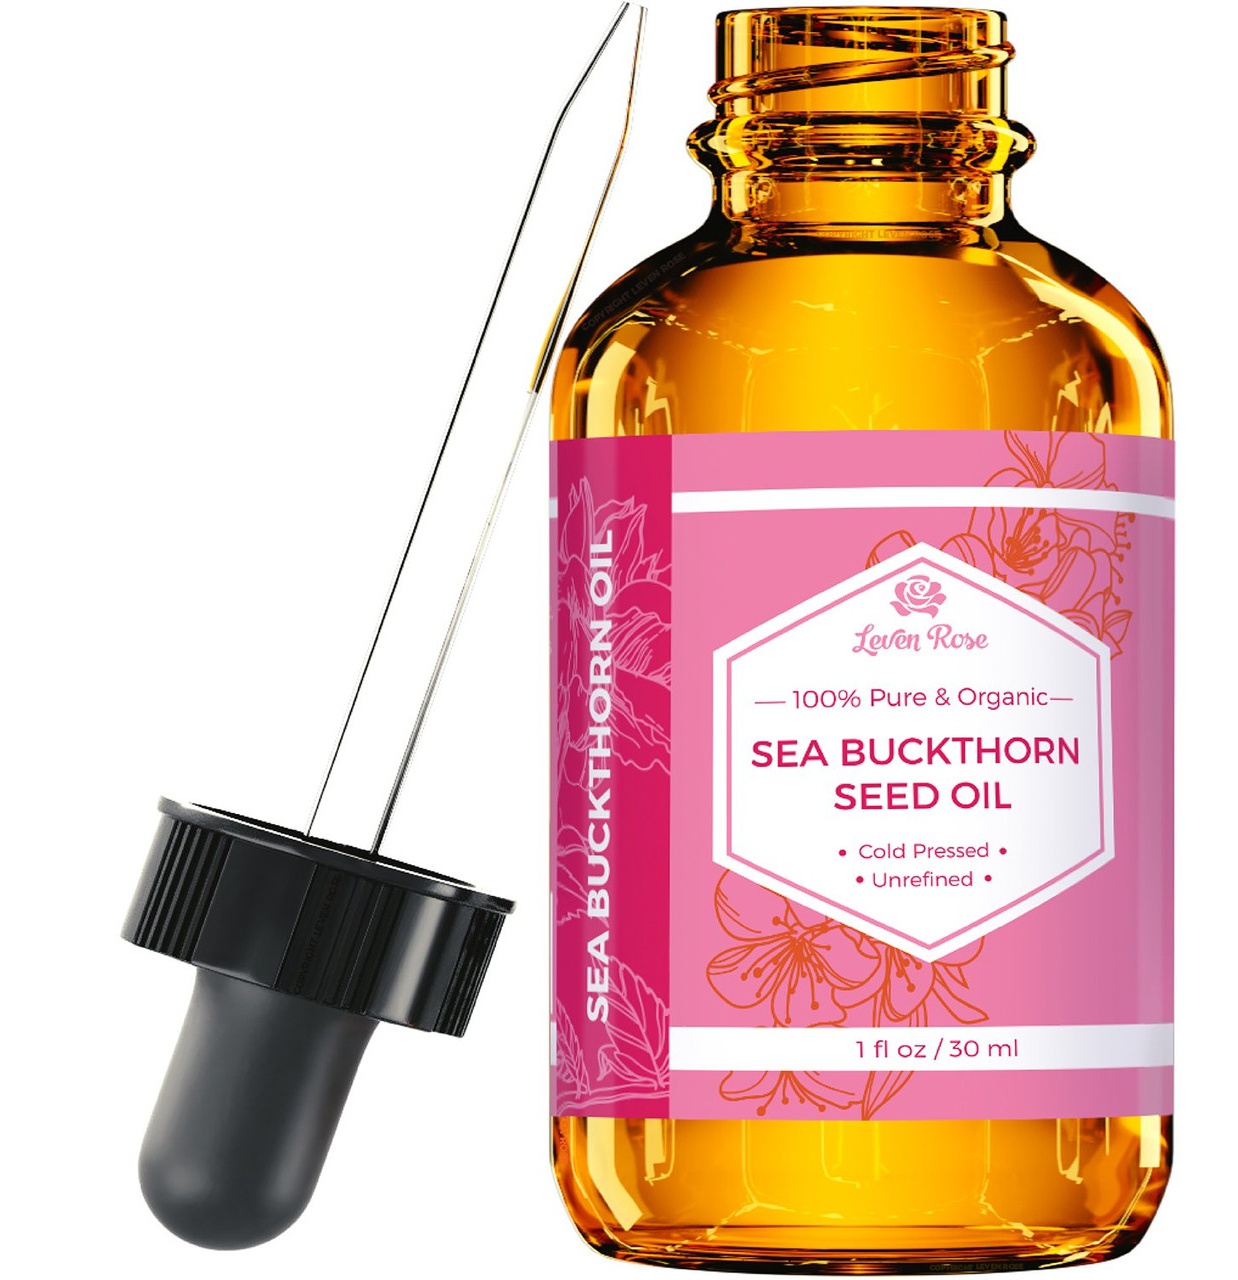 Leven Rose Sea Buckthorn Seed Oil, 100% Pure Unrefined Cold Pressed Anti Aging Acne Treatment For Hair Skin And Nails